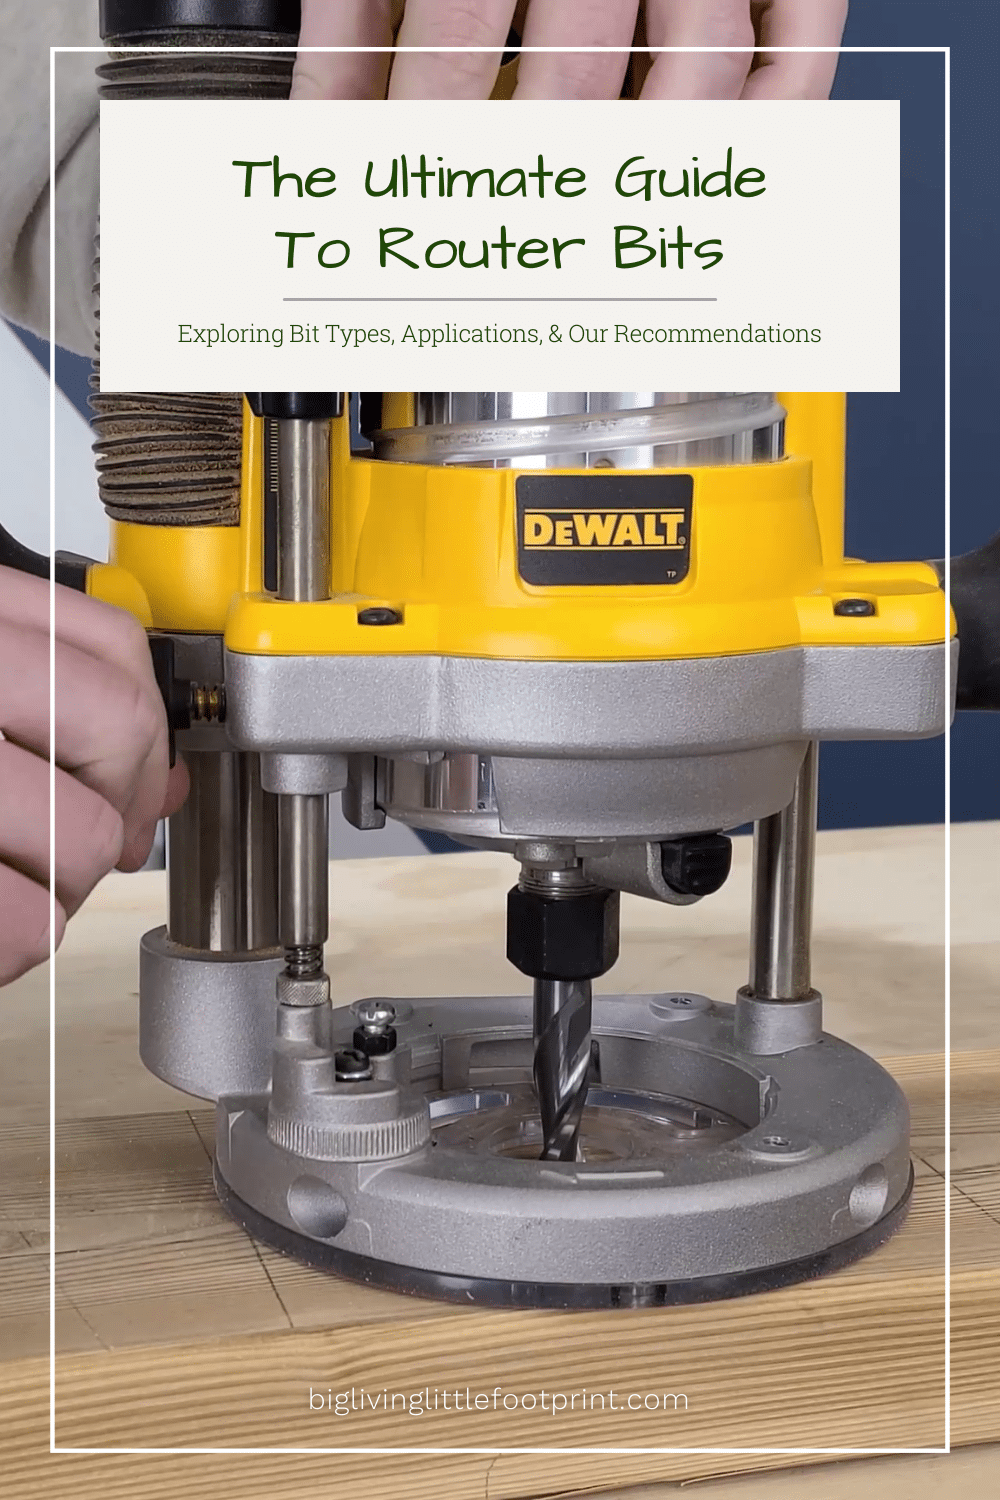 The Ultimate Guide to Router Bits: Exploring Types and Applications